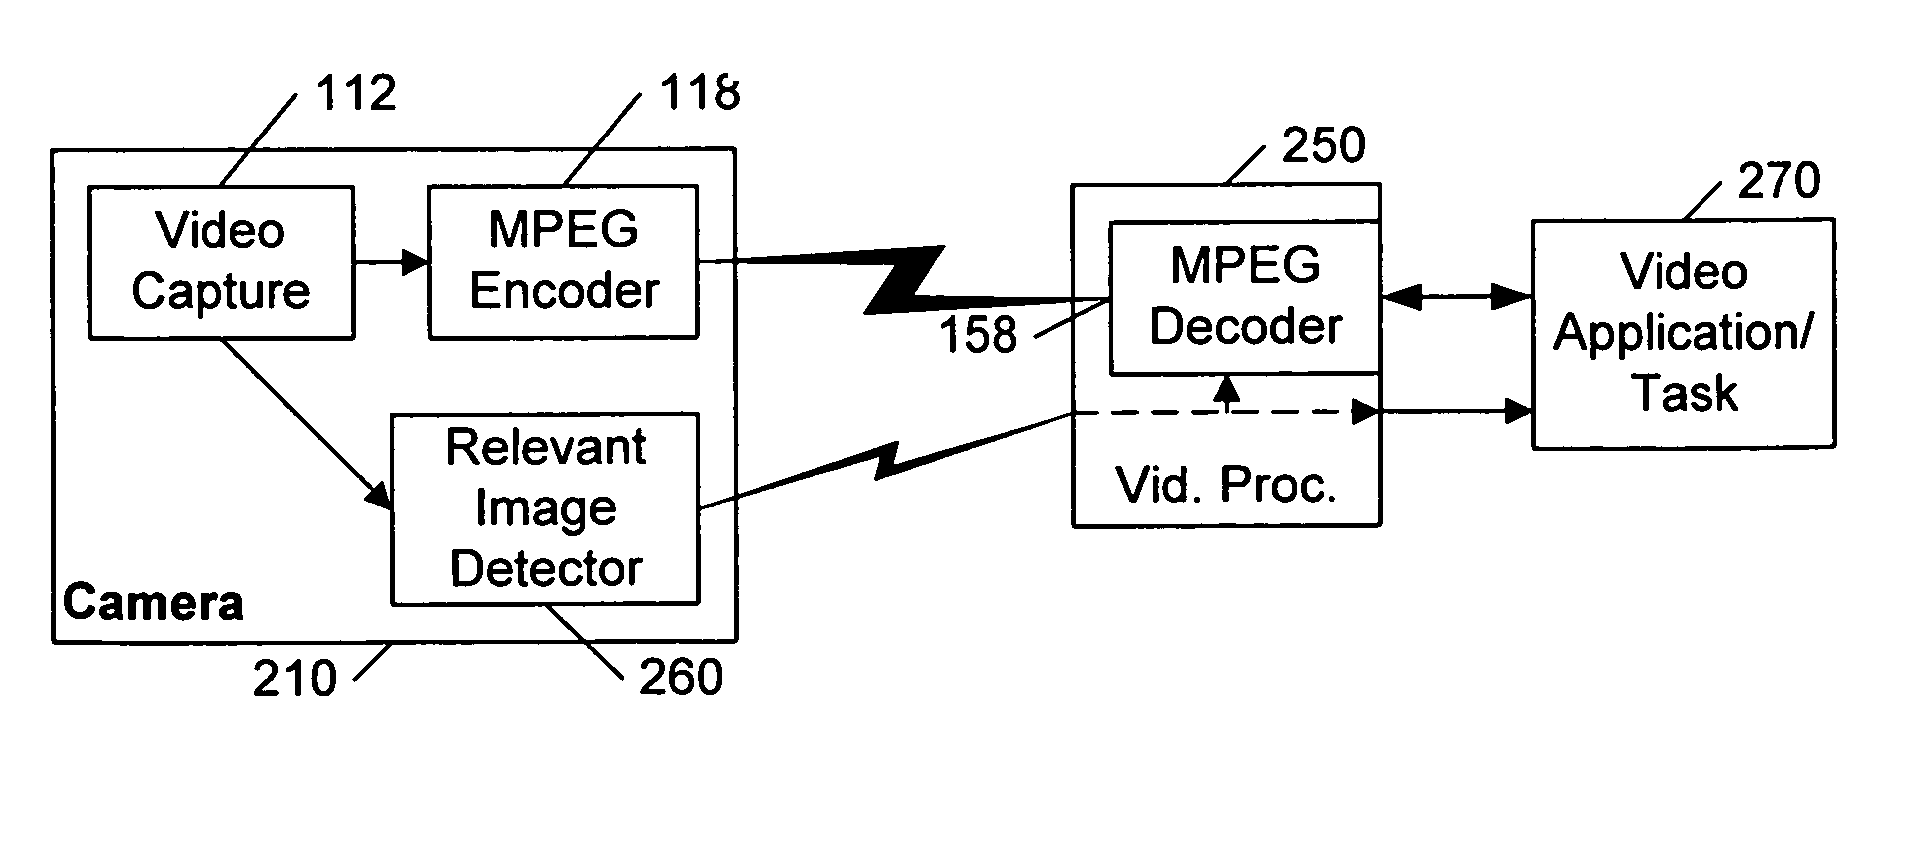 Relevant image detection in a camera, recorder, or video streaming device